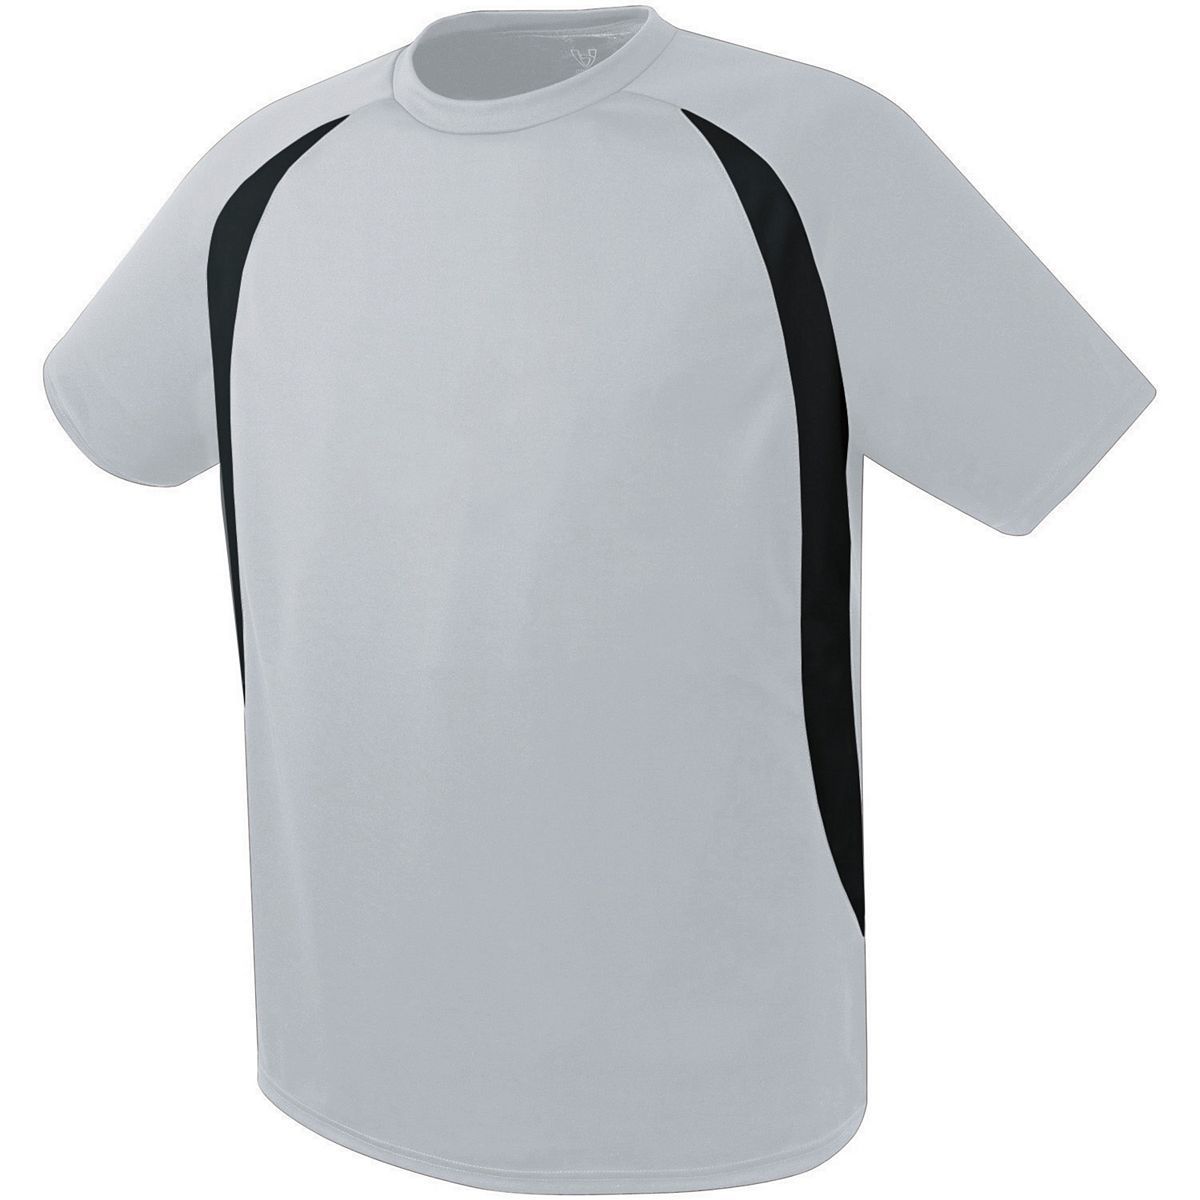 High 5 Youth Liberty Soccer Jersey in Silver Grey/Black  -Part of the Youth, Youth-Jersey, High5-Products, Soccer, Shirts, All-Sports-1 product lines at KanaleyCreations.com